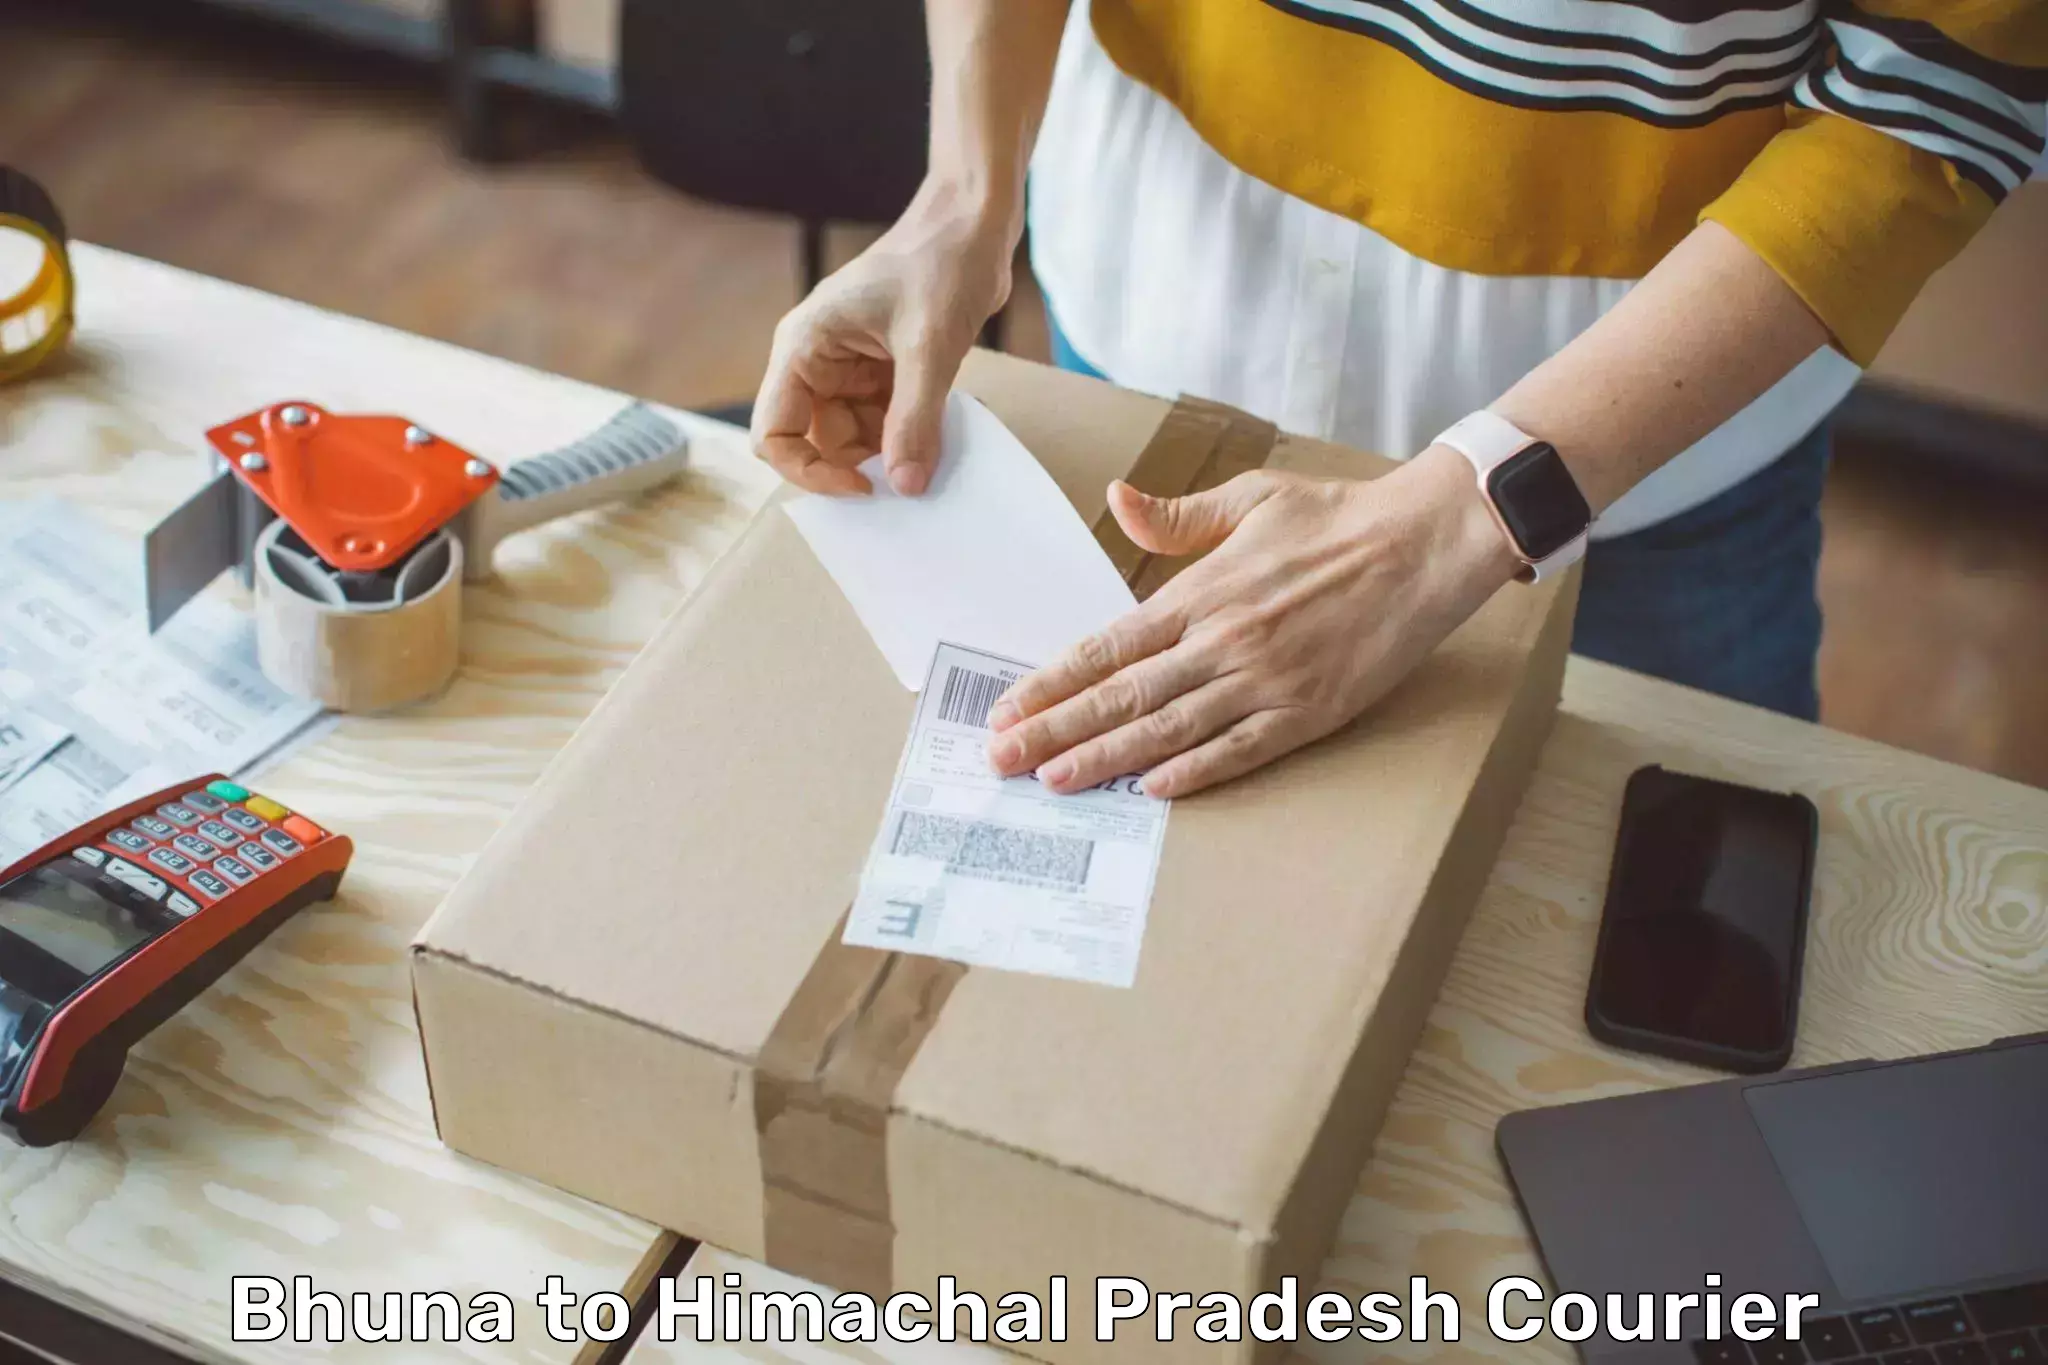 Nationwide parcel services Bhuna to Himachal Pradesh